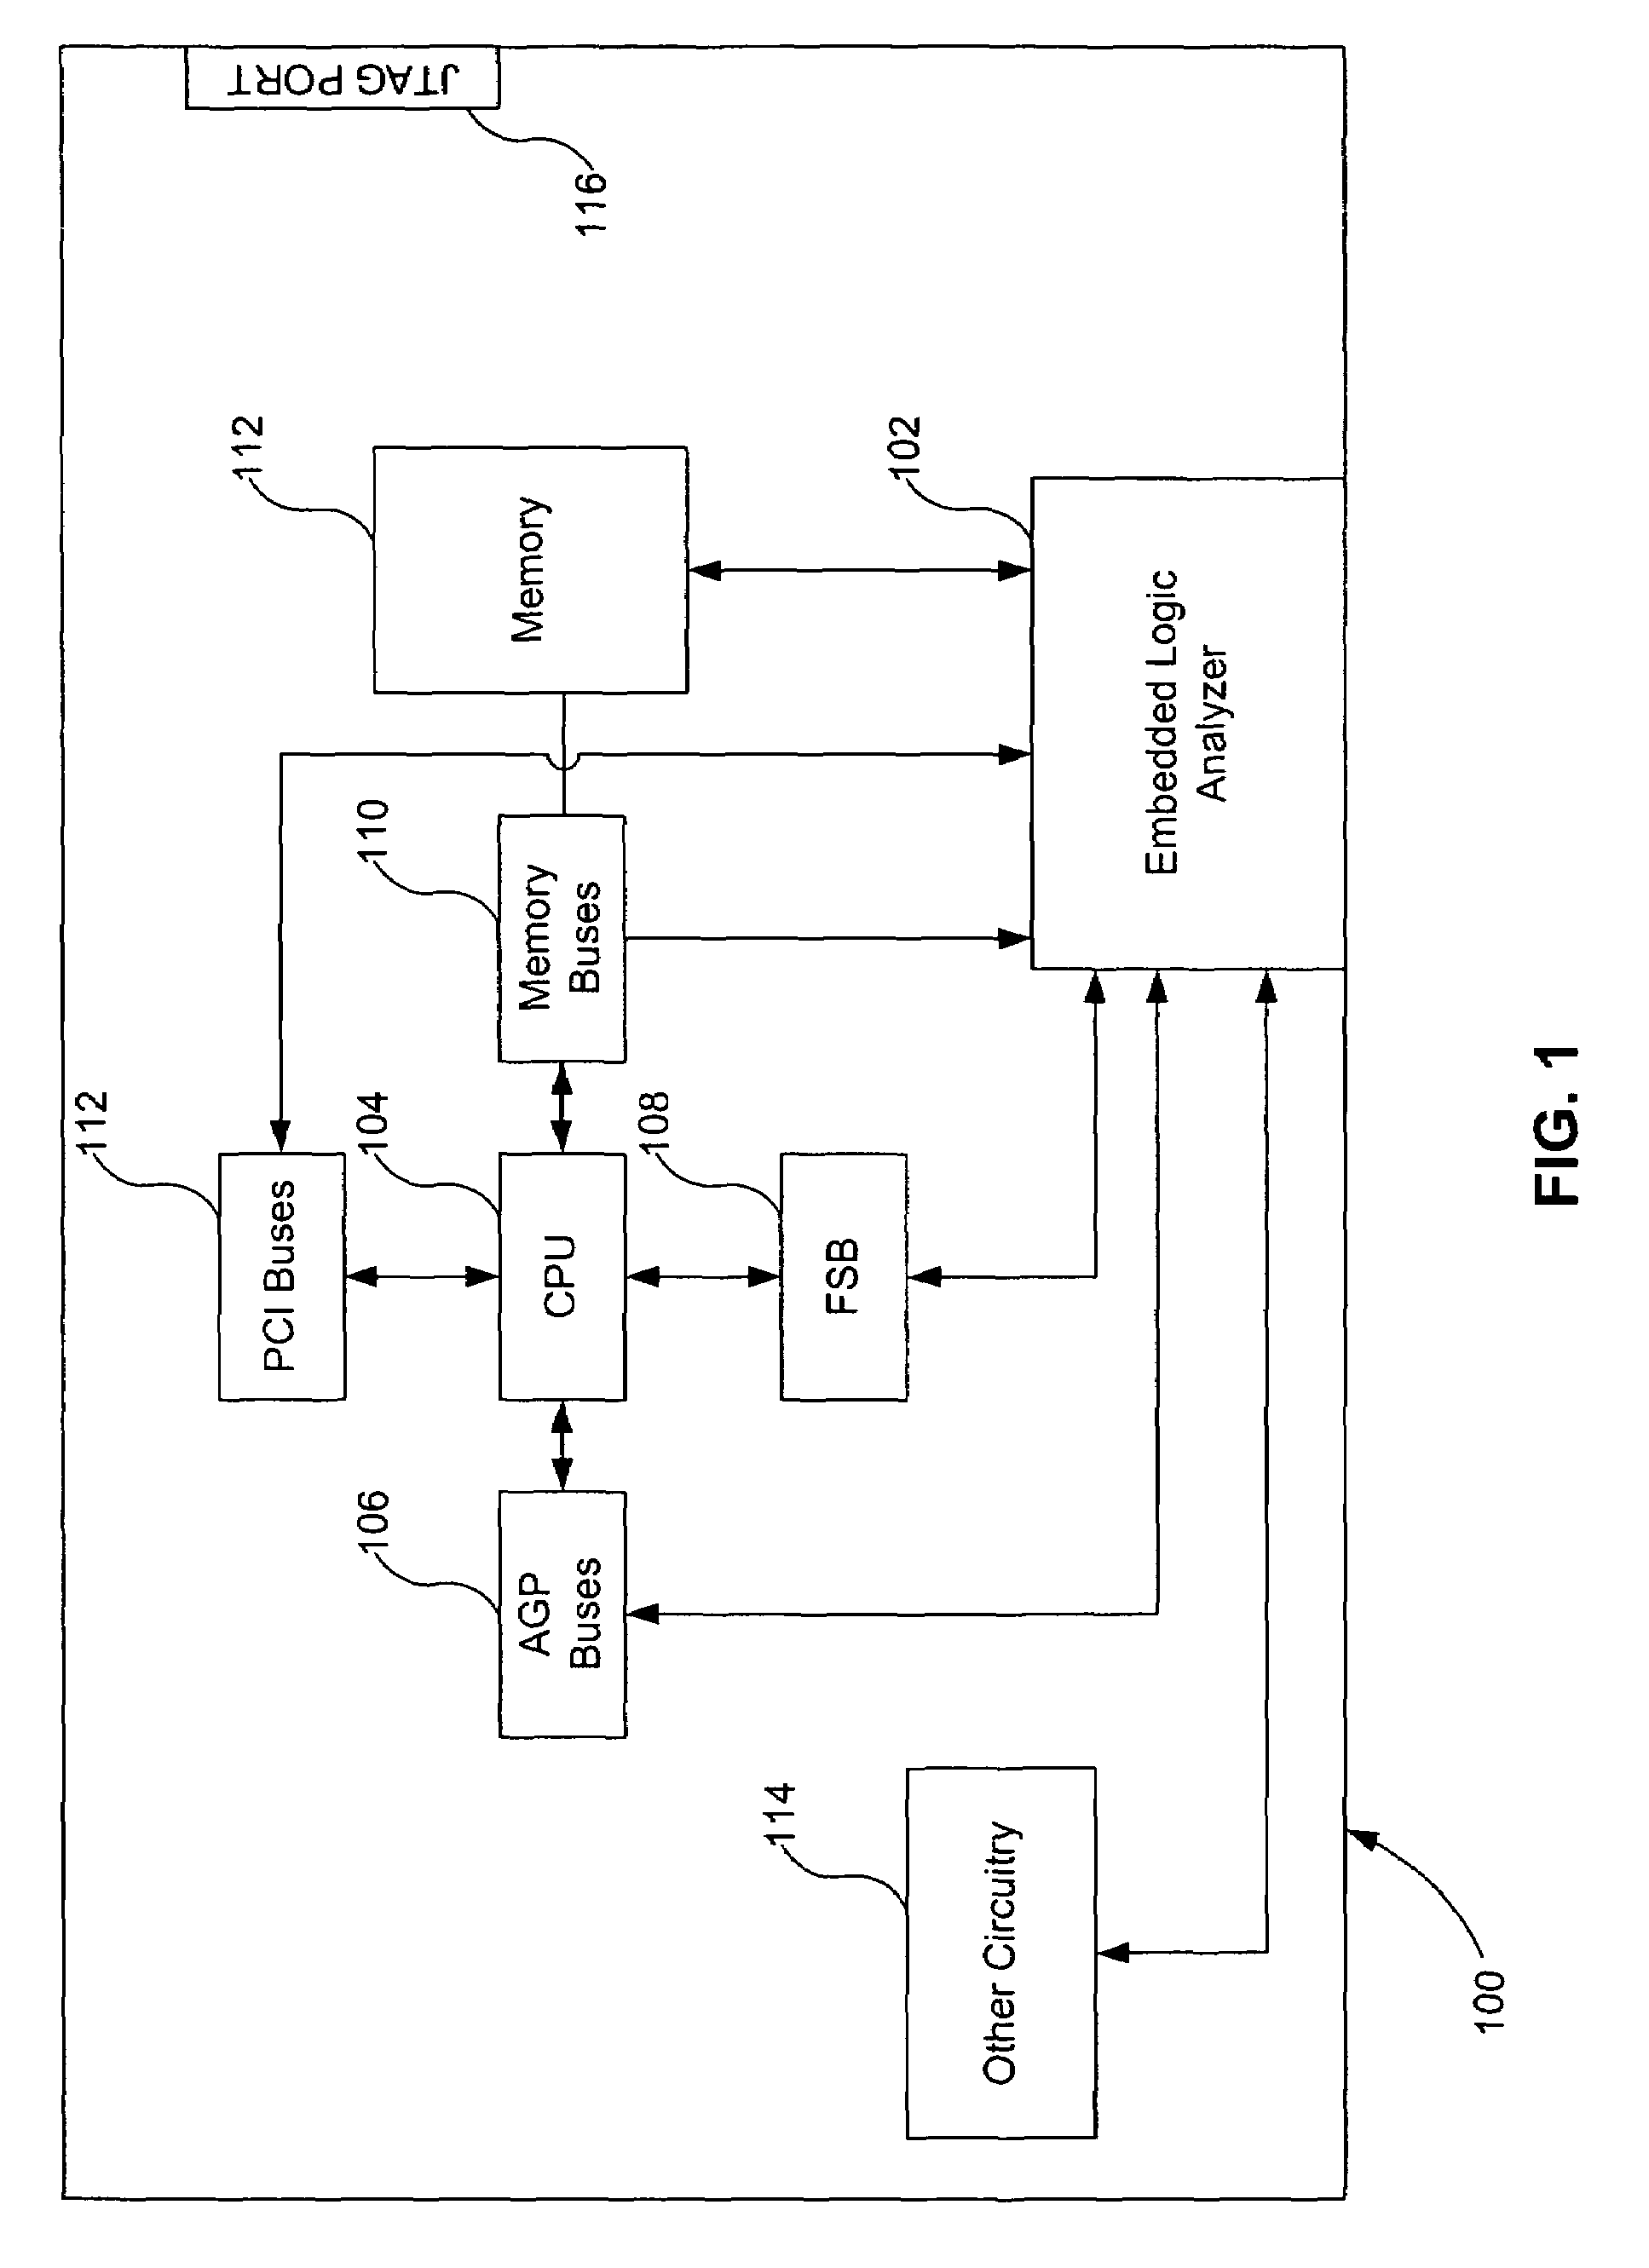 Programmable embedded logic analyzer in an integrated circuit